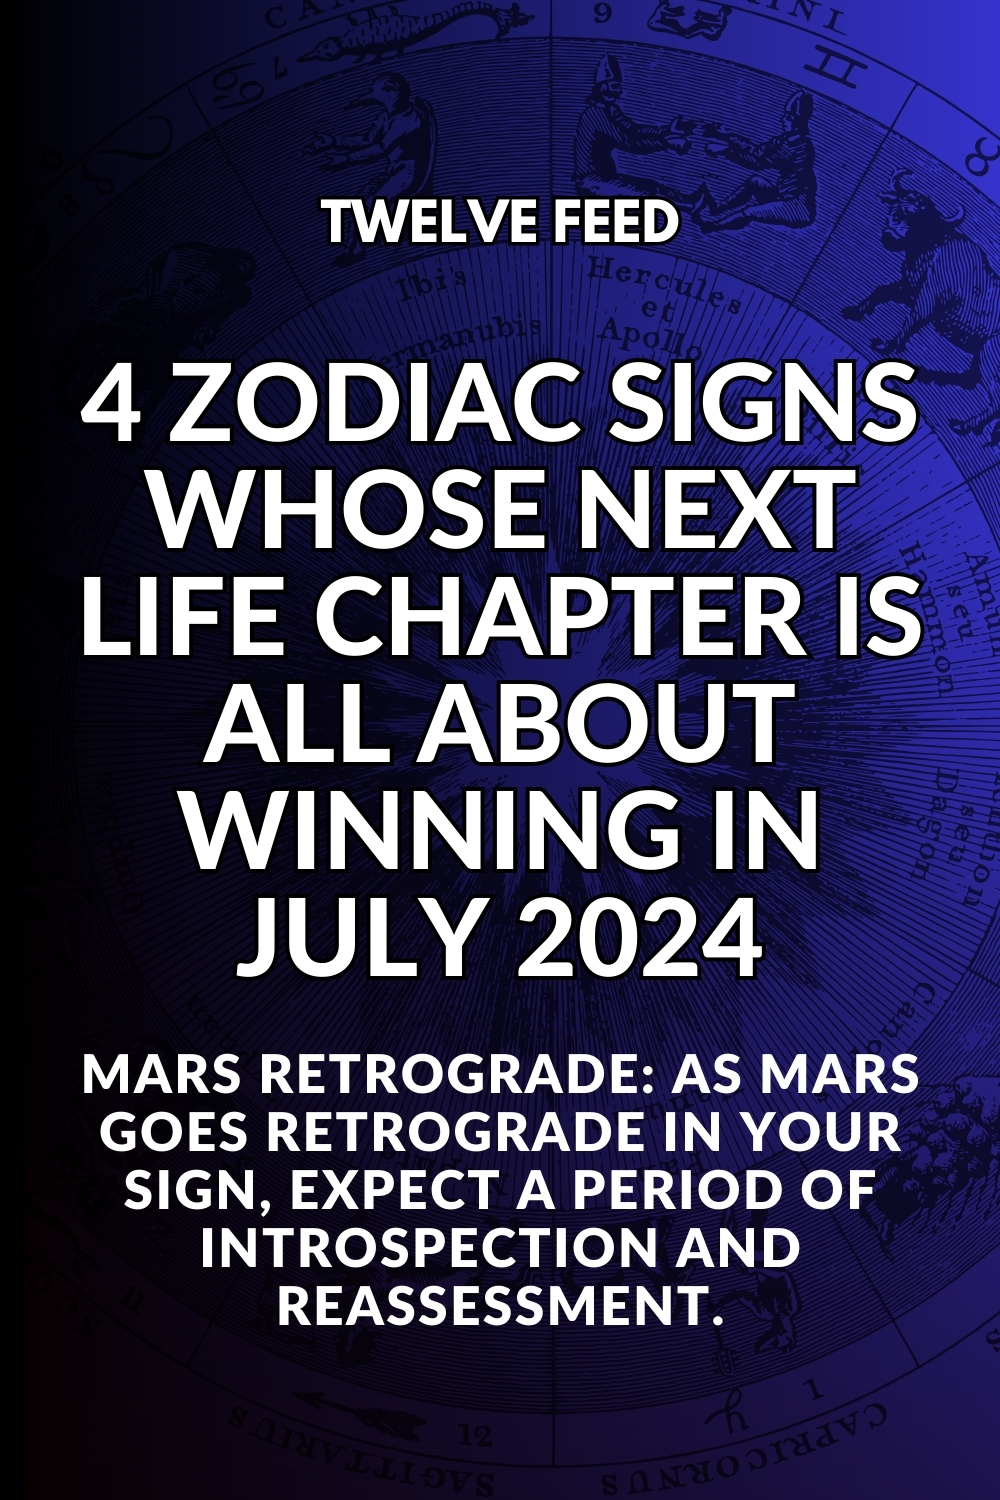 4 Zodiac Signs Whose Next Life Chapter Is All About Winning In July 2024